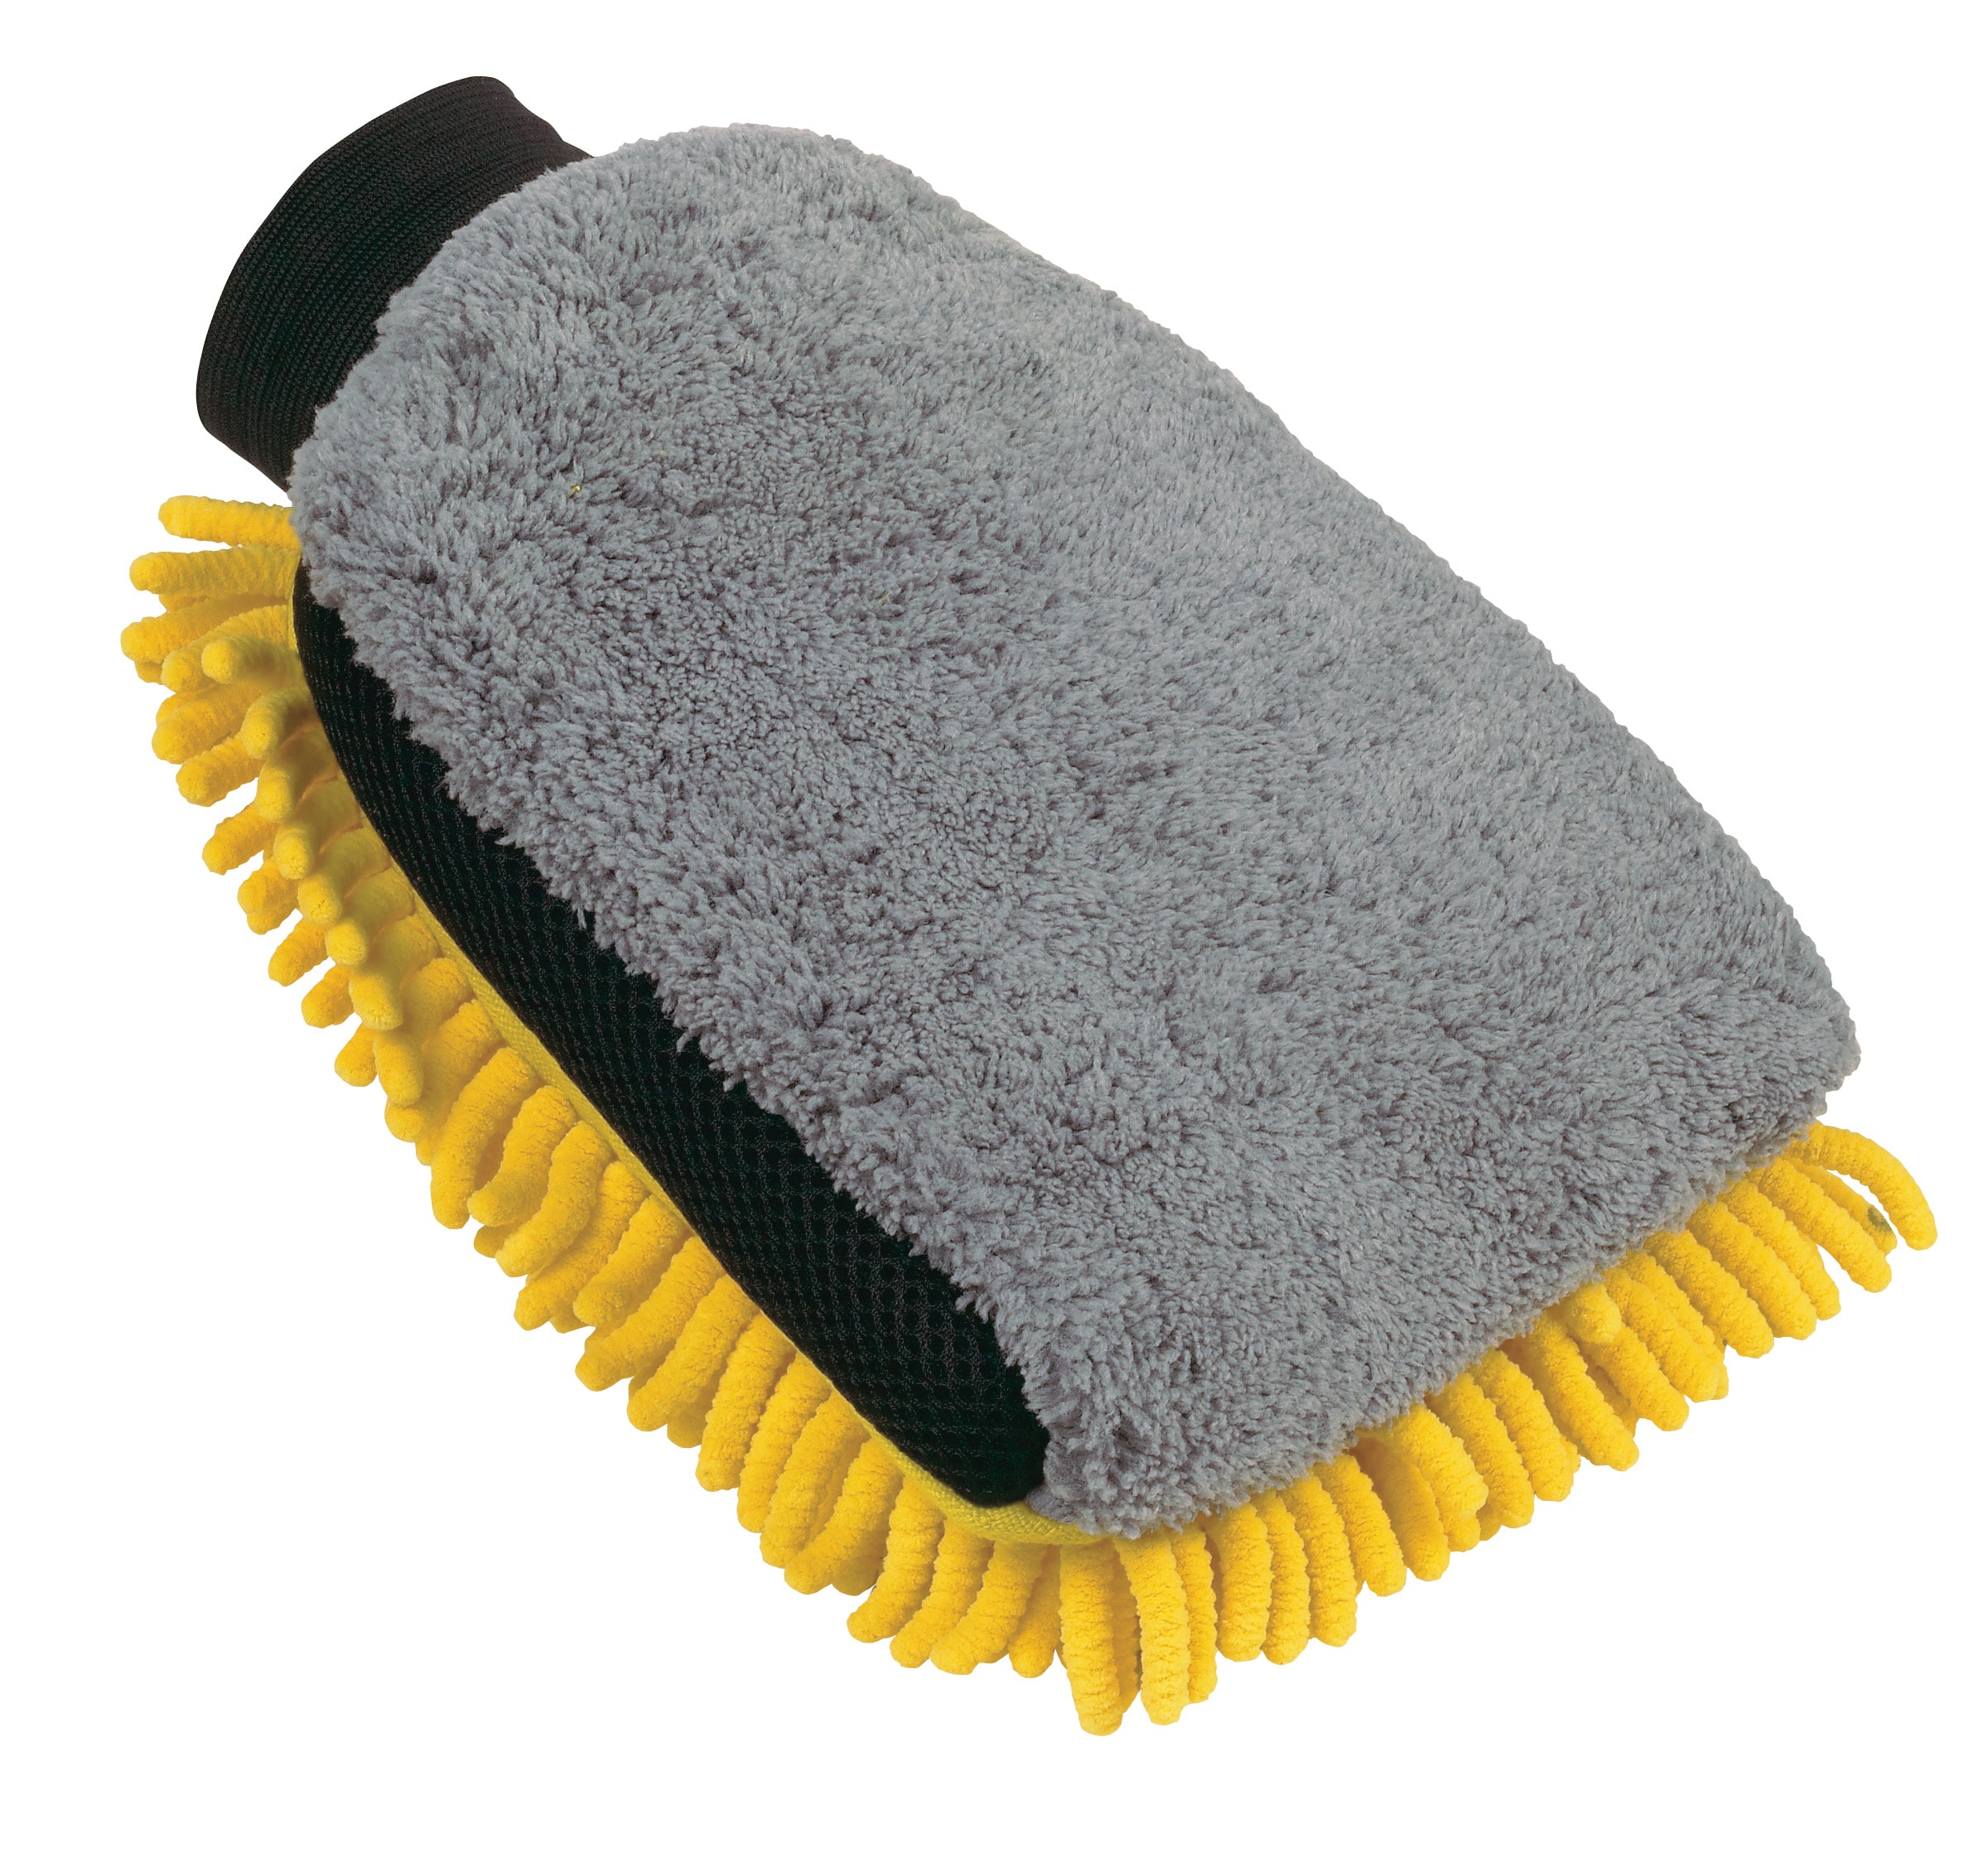 Grip 2-in-1 Microfiber/Chenille Wash Mitt - for Wet or Dry Use, Size: One Size